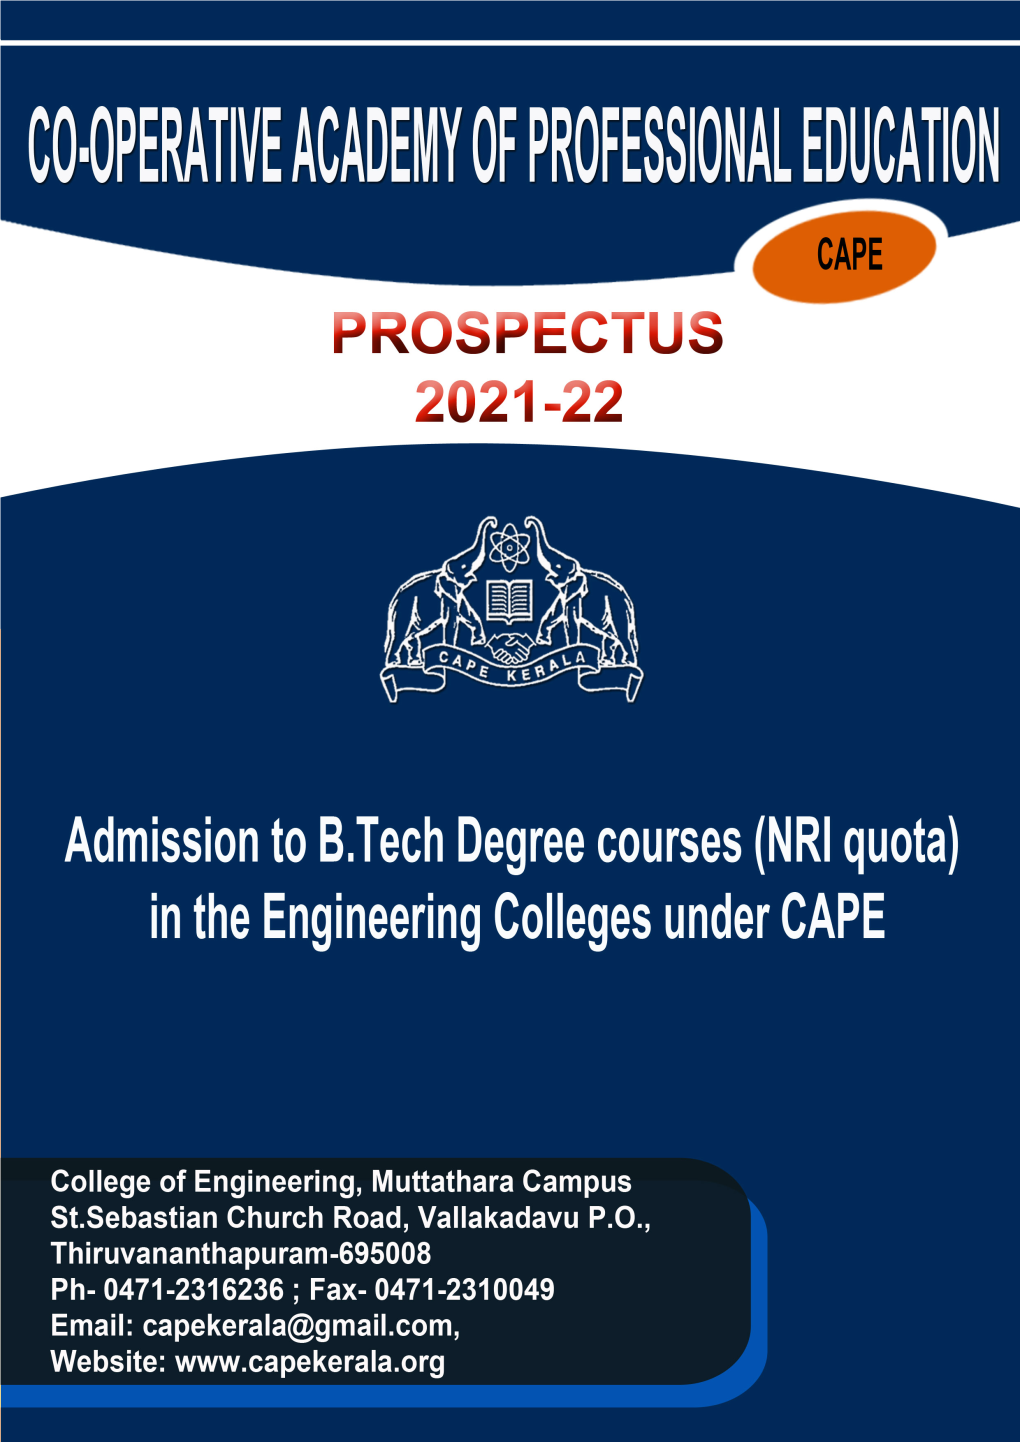 To Download the Prospectus 2021-22 for Admission to B.Tech Degree